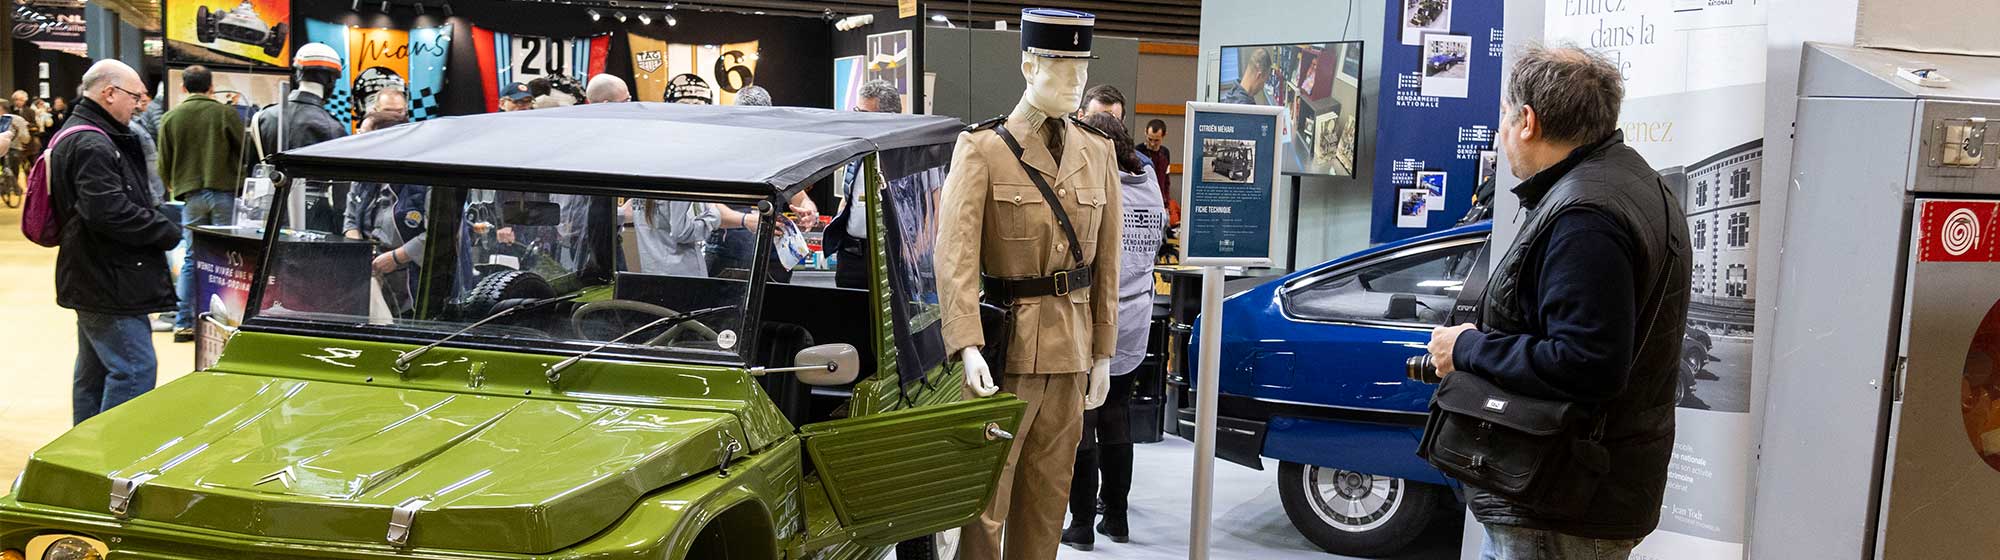 Man looking at a manequin on the gendarmerie exhibition at Rétromobile